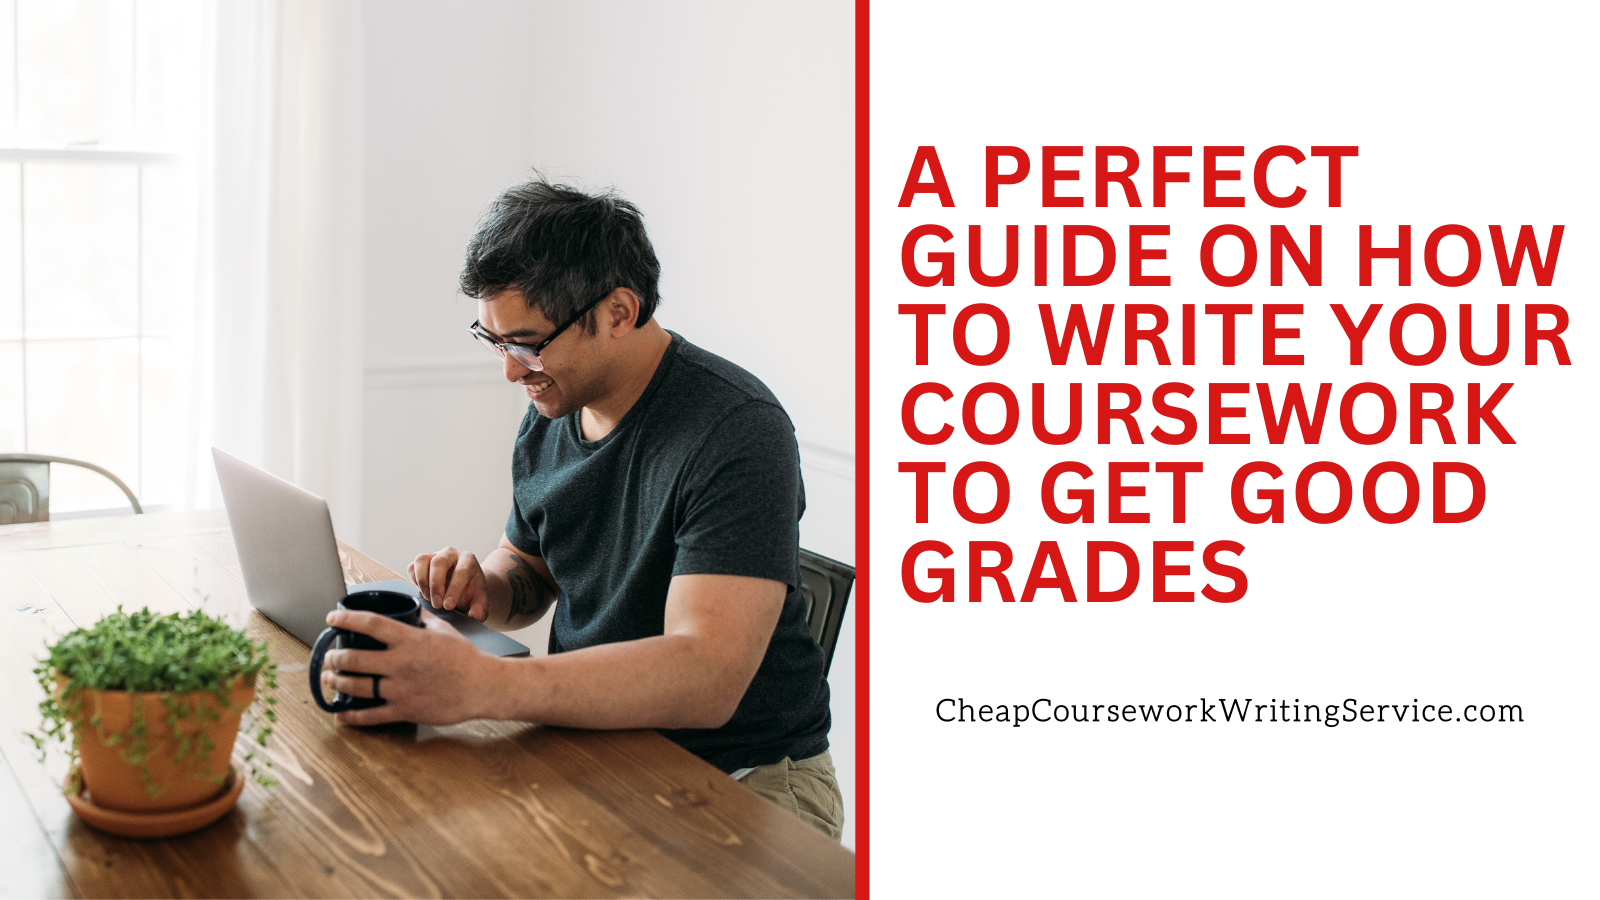 A Perfect Guide on How to Write Your Coursework to Get Good Grades